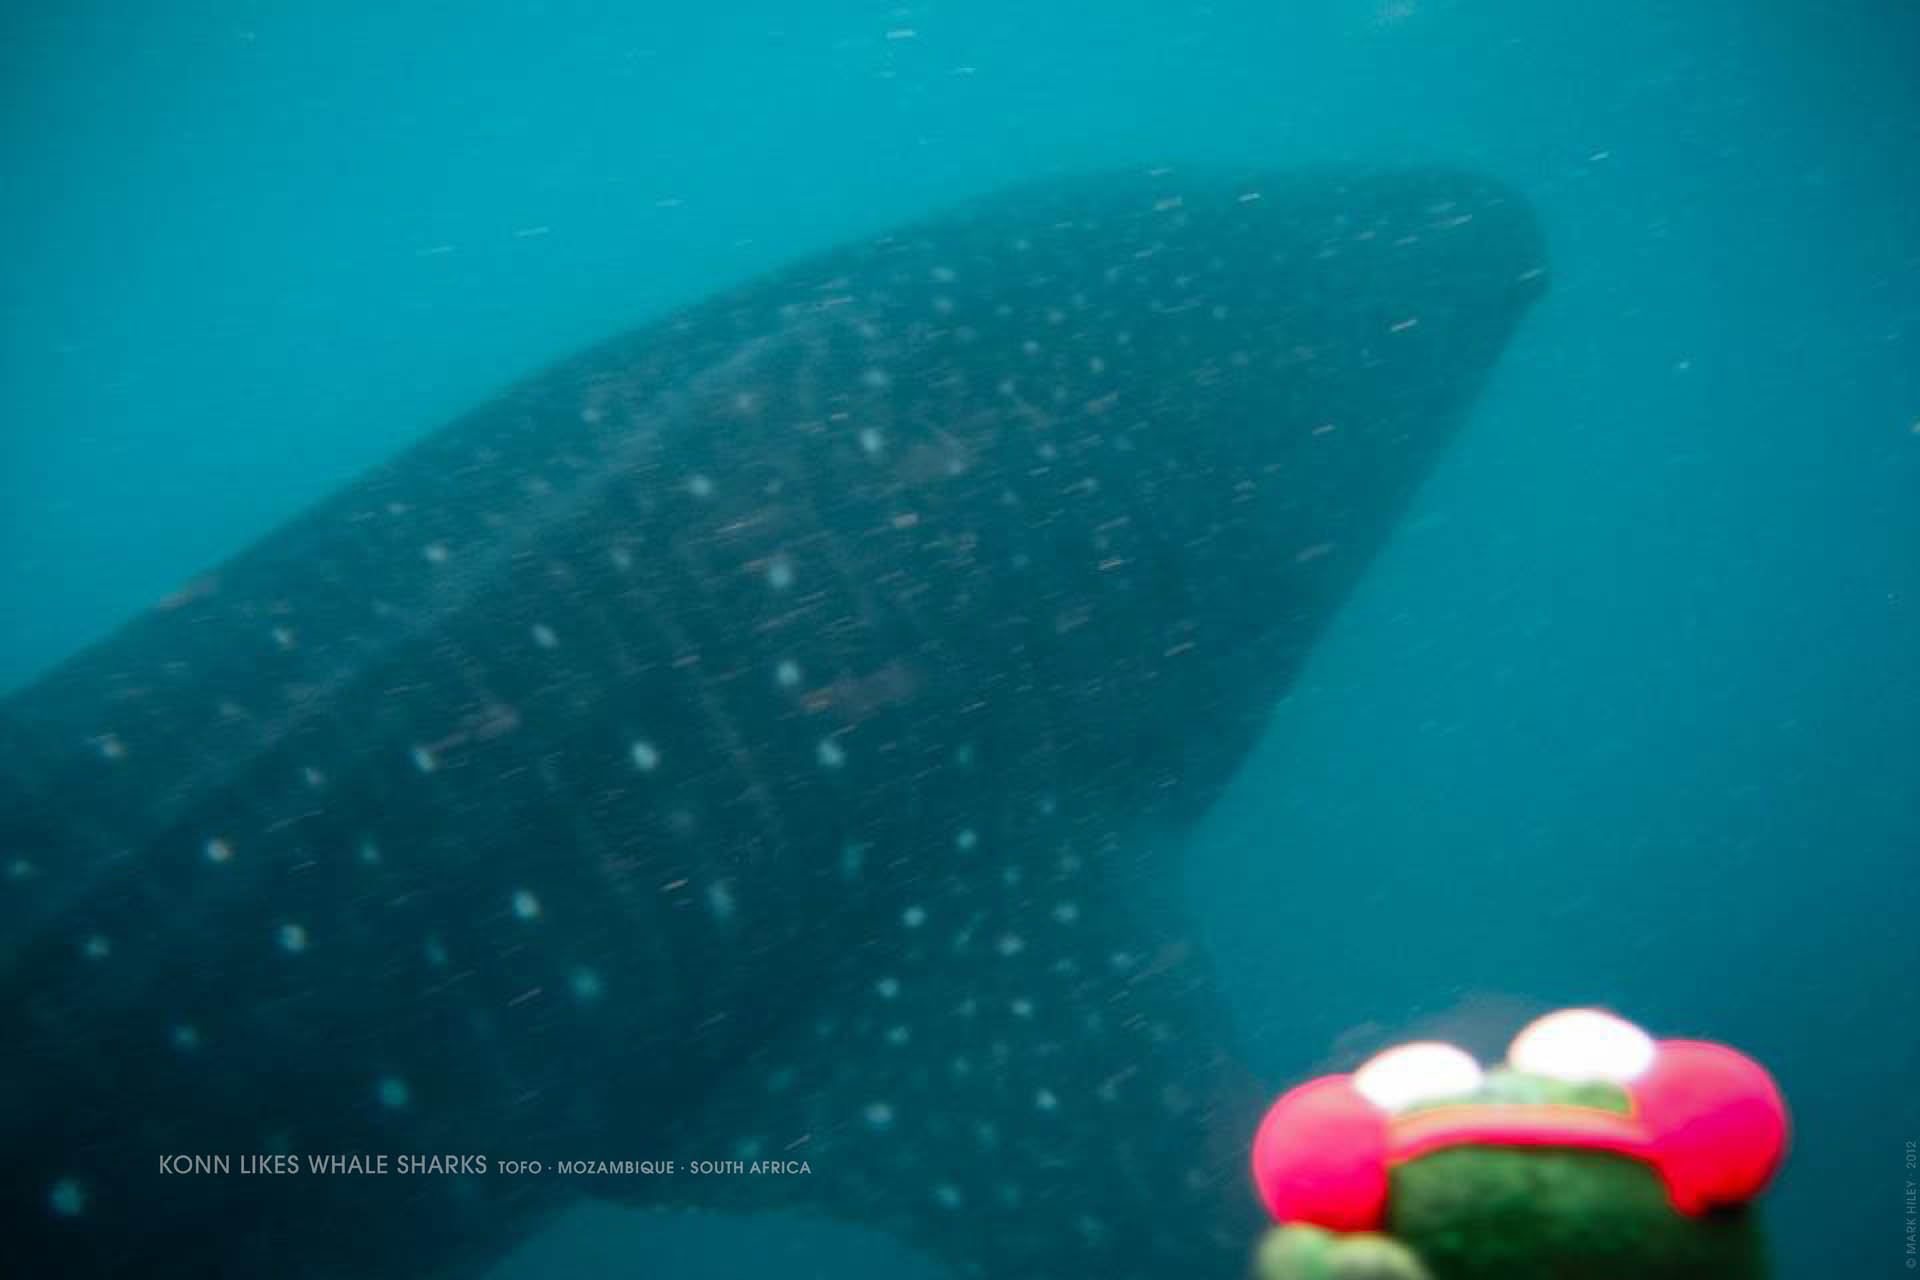 Mark Hiley's KONN THE FROG likes Whale Sharks, Tofo, Mozambique, South Africa